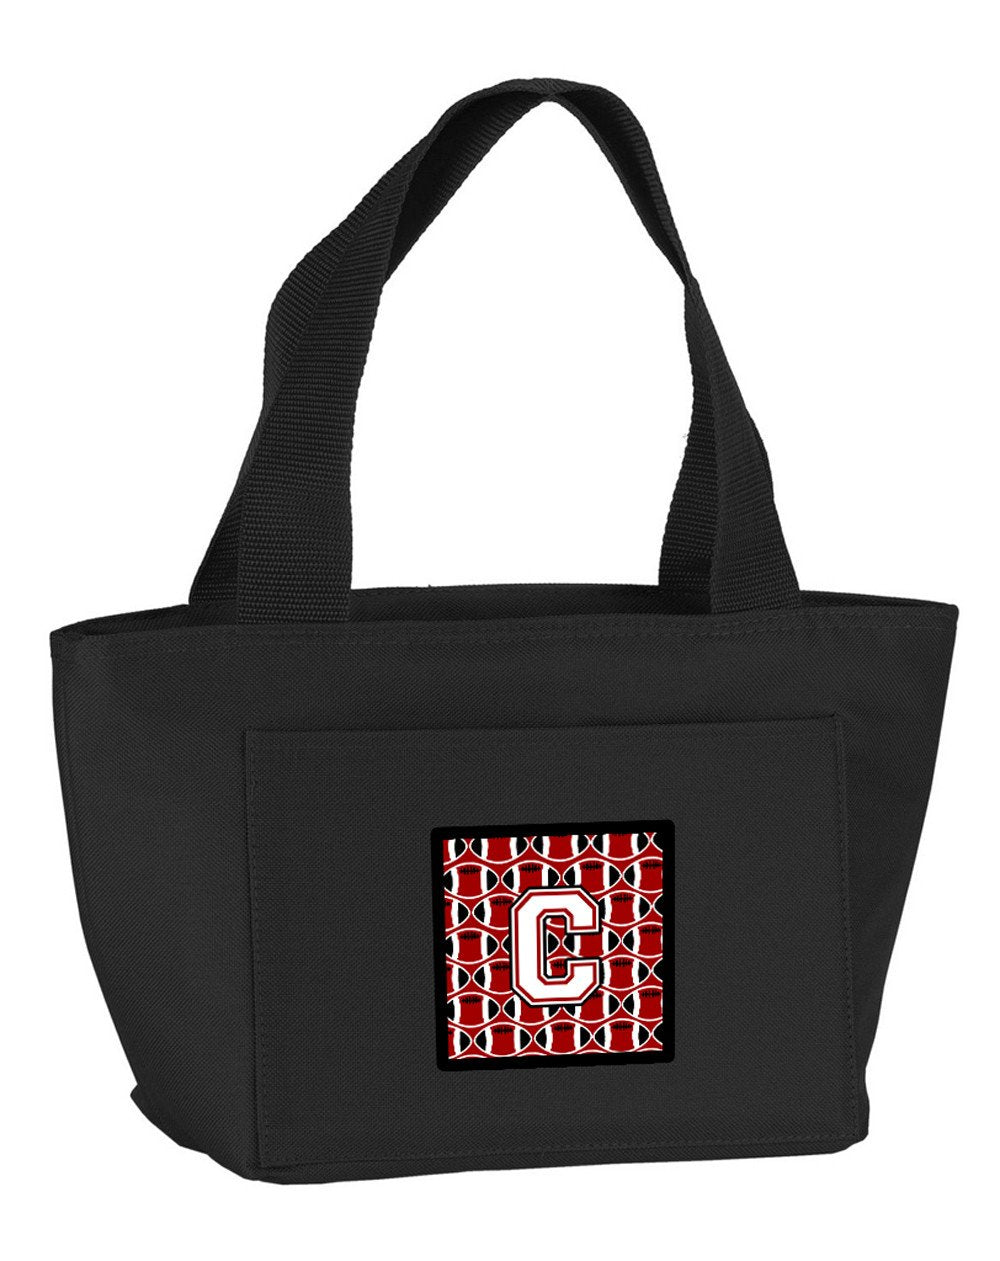 Letter C Football Cardinal and White Lunch Bag CJ1082-CBK-8808 by Caroline's Treasures